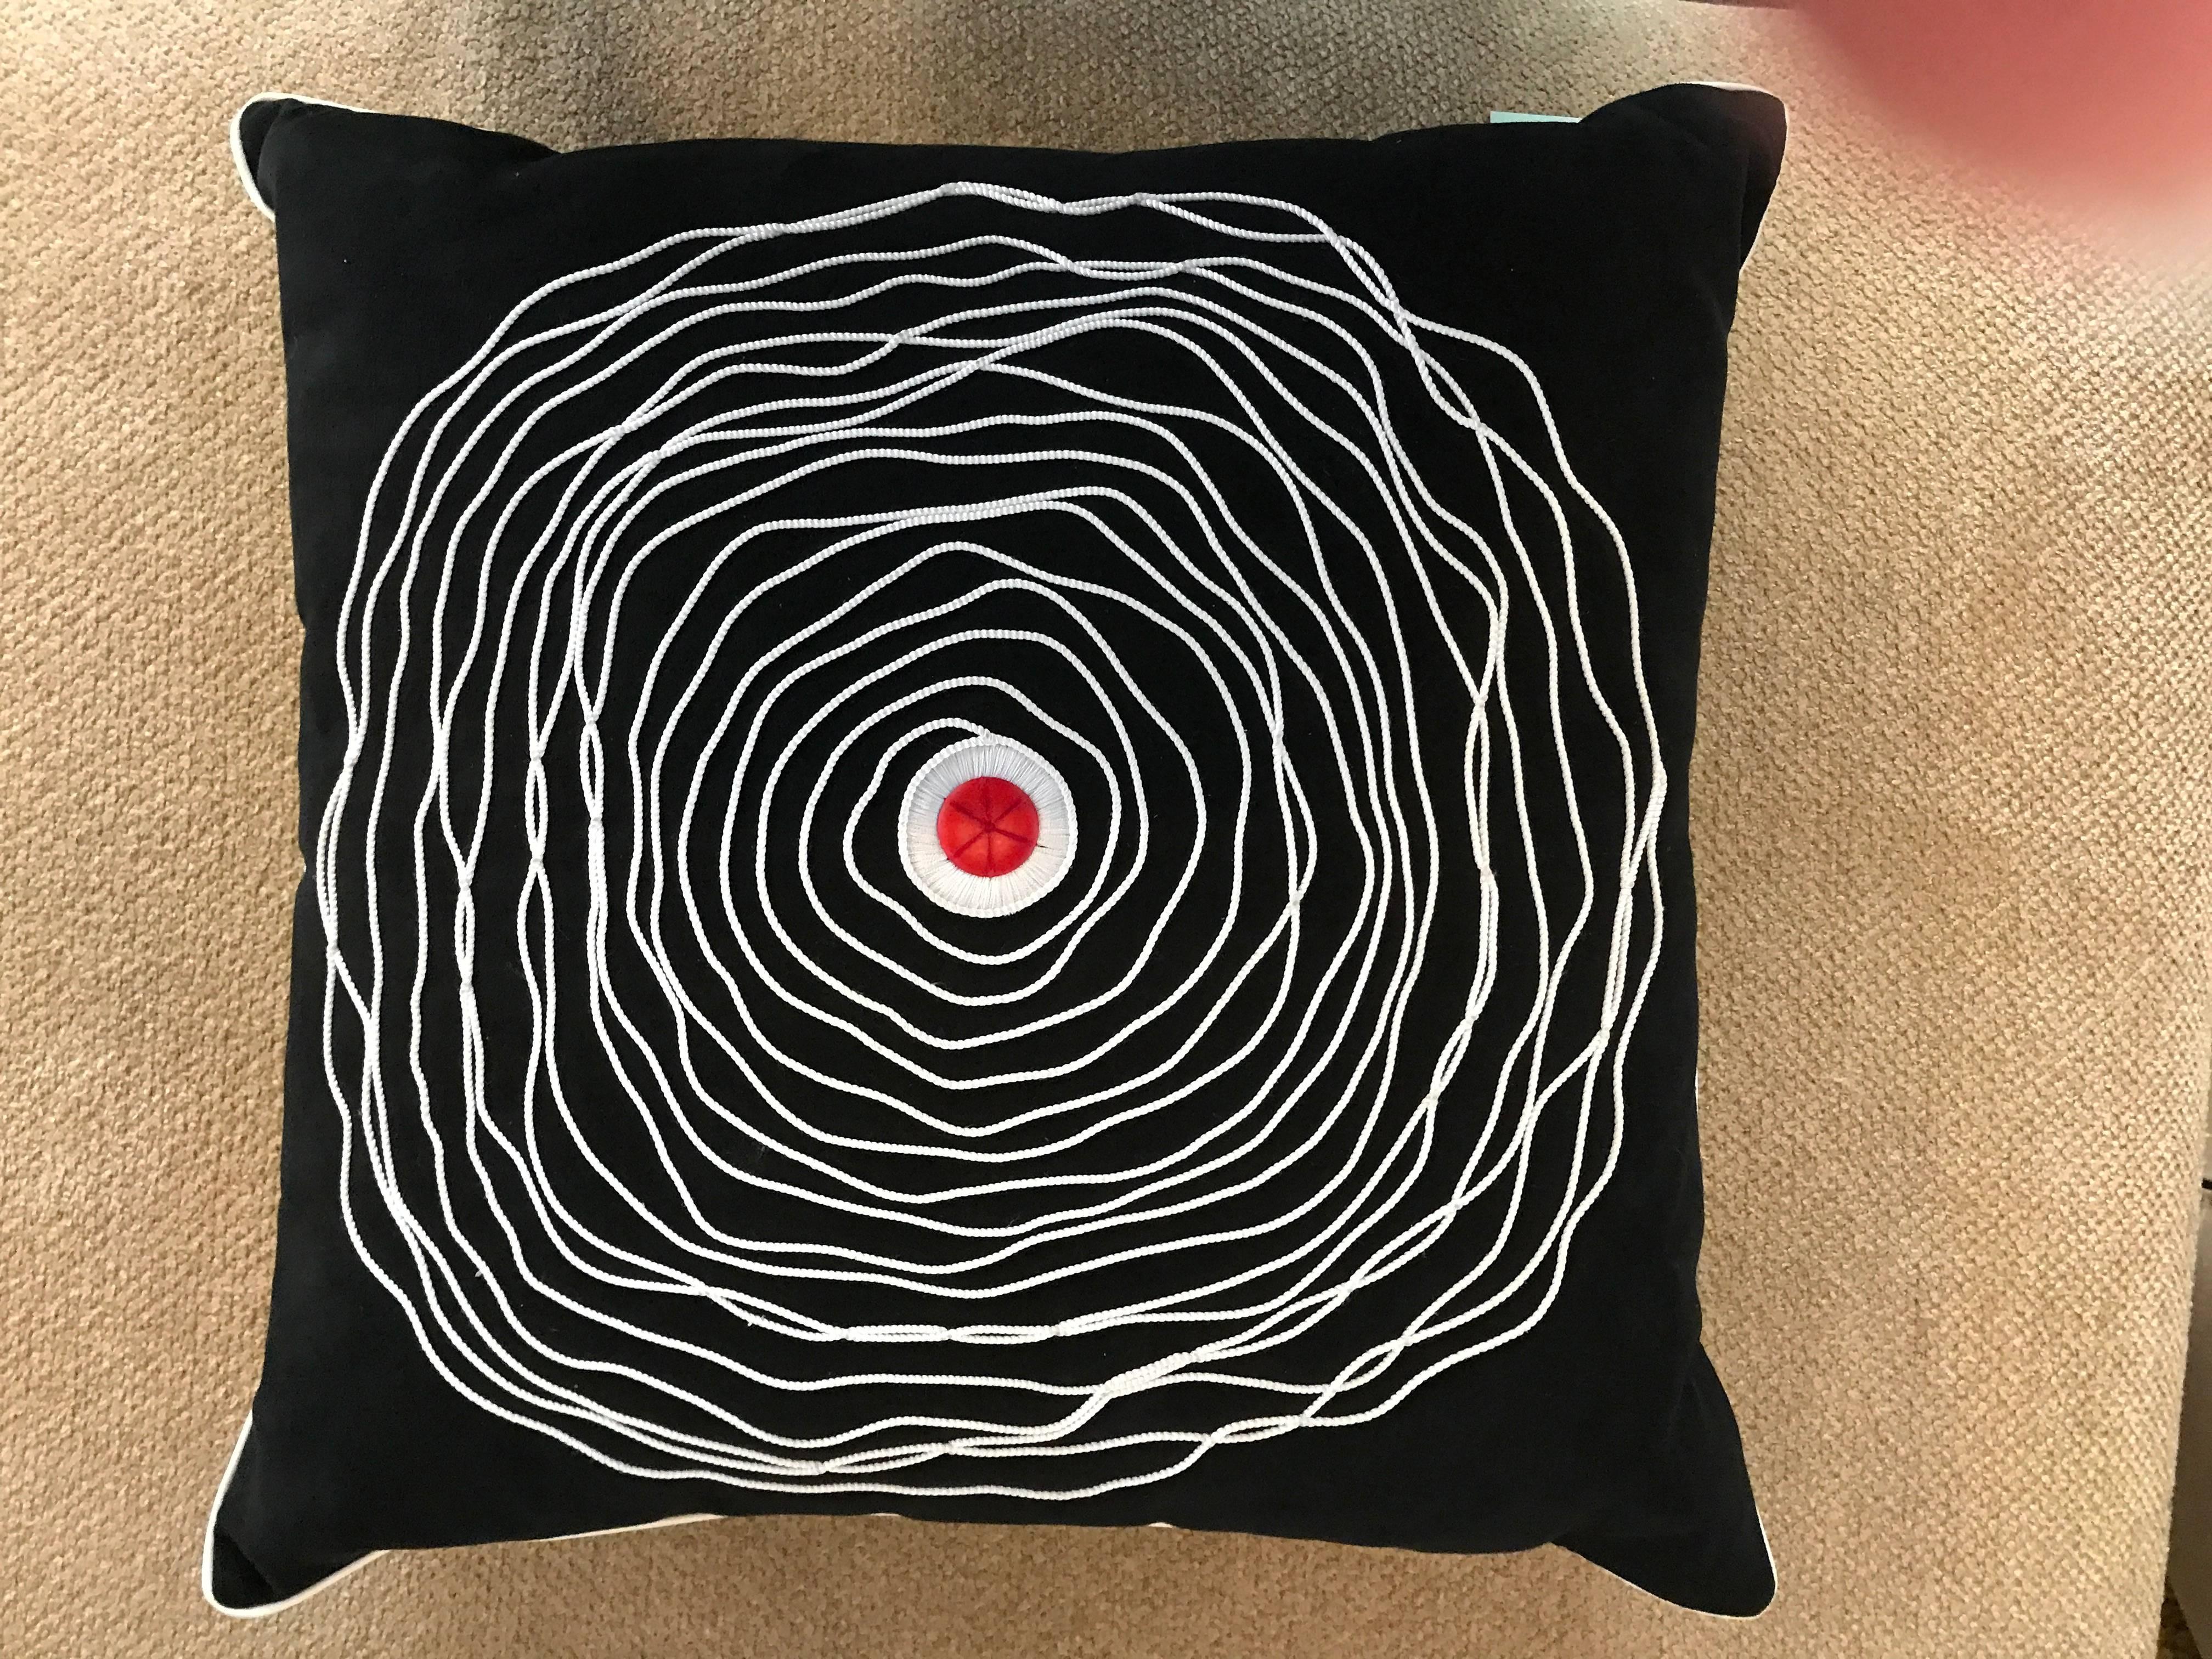 These very high end decorative pillow came from the premiere home store in Palm Springs, CA that closed over a decade ago. They were purchased by my interior designer client and never used. Still obtains original tag. Amazing Bindu spiral cording